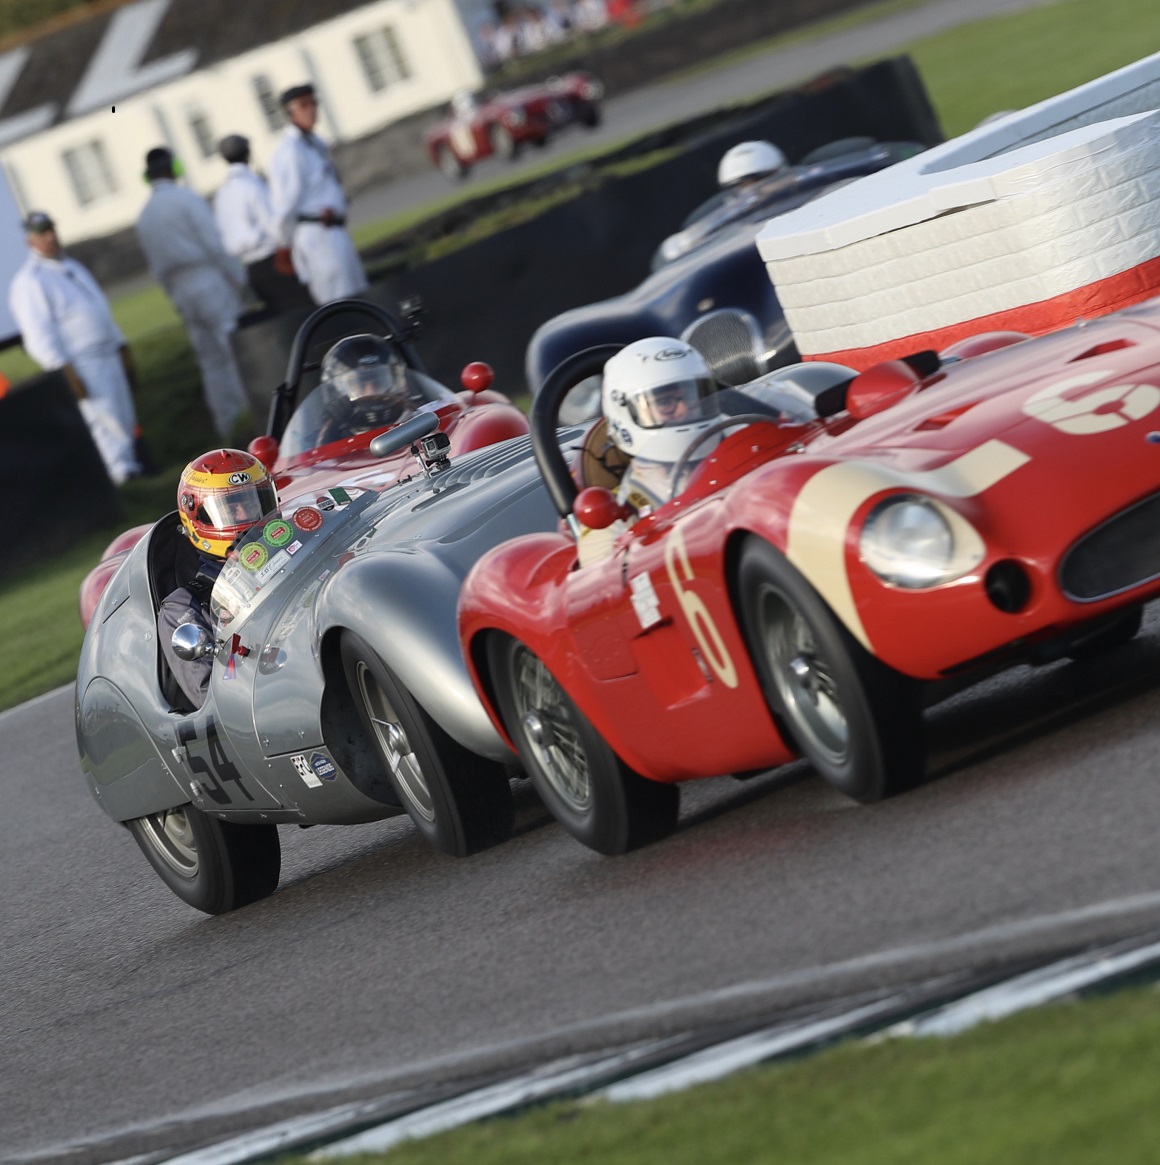 Starting the race from the back of the grid, the Cooper T33 charged from the back of the grid to the front to claim another victory in the Freddie March Memorial Trophy.